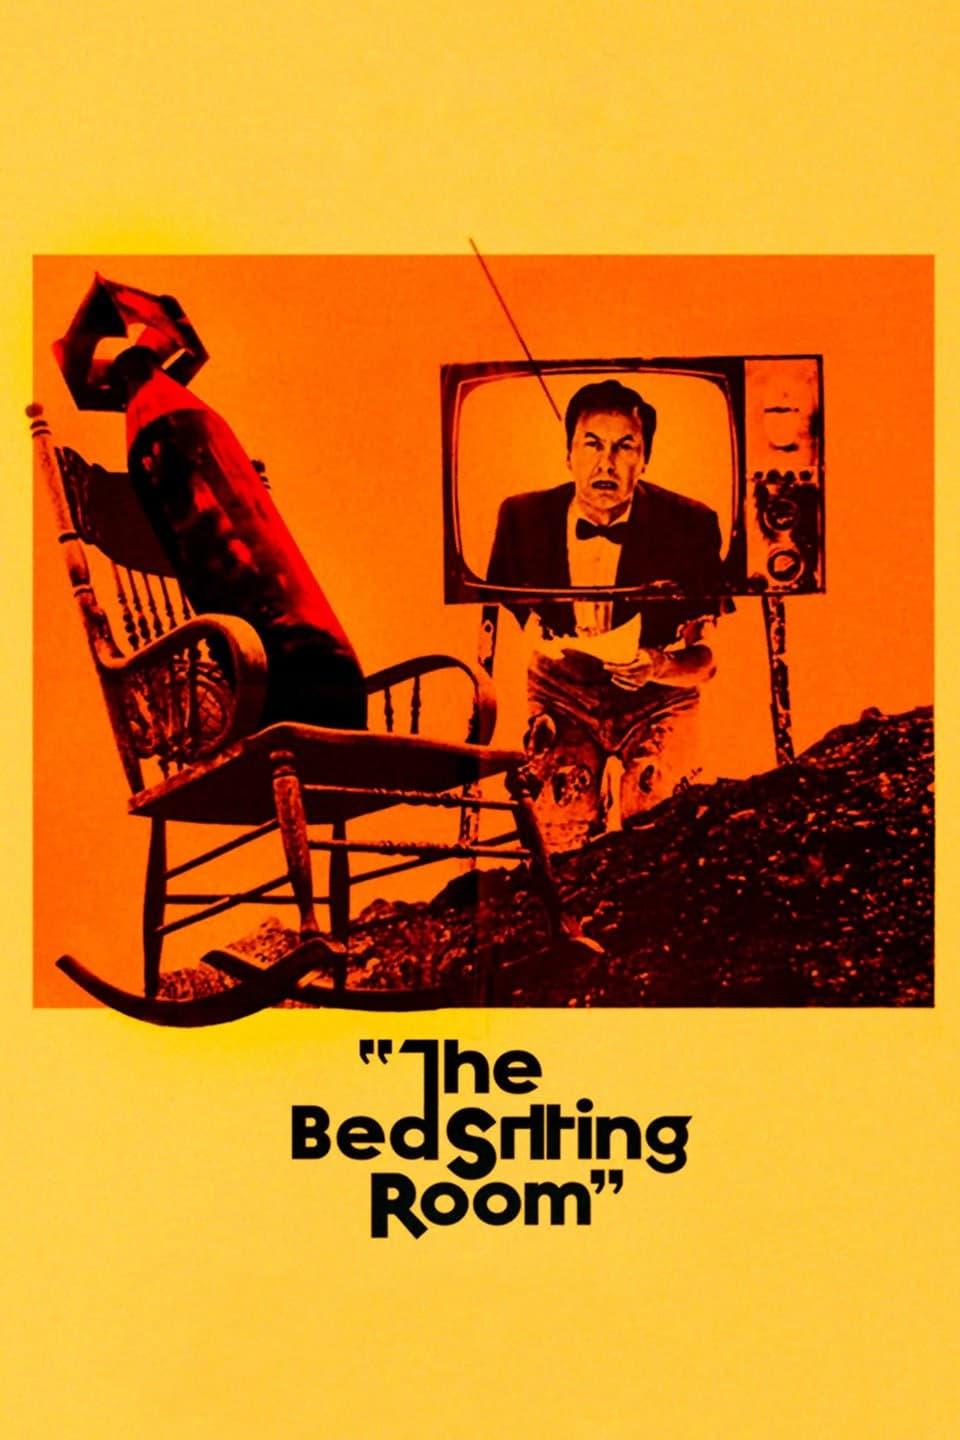 The Bed Sitting Room poster